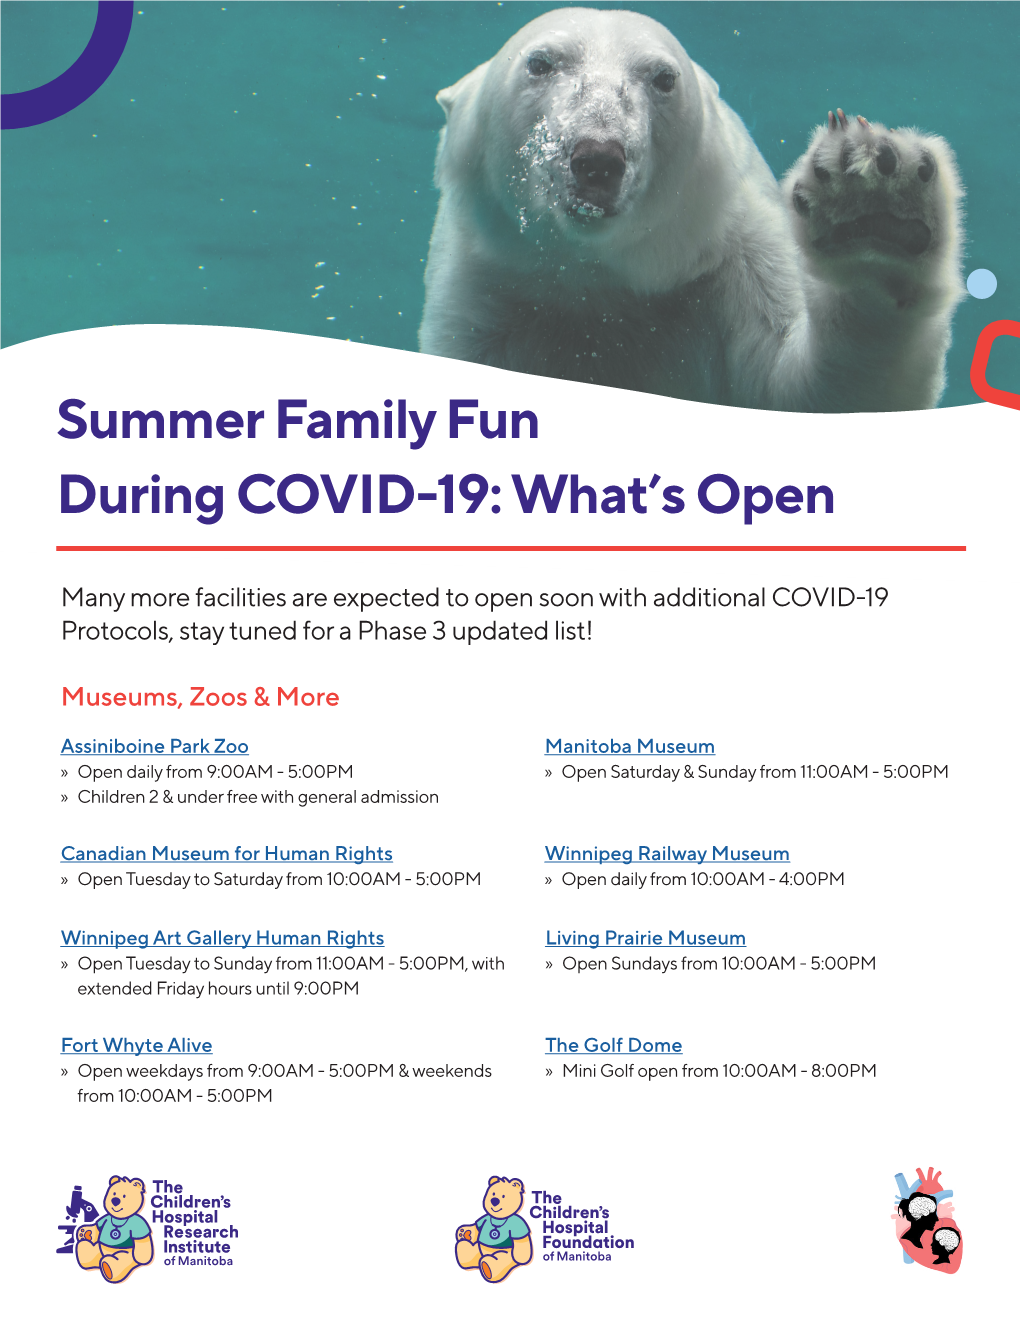 Summer Family Fun During COVID-19: What's Open